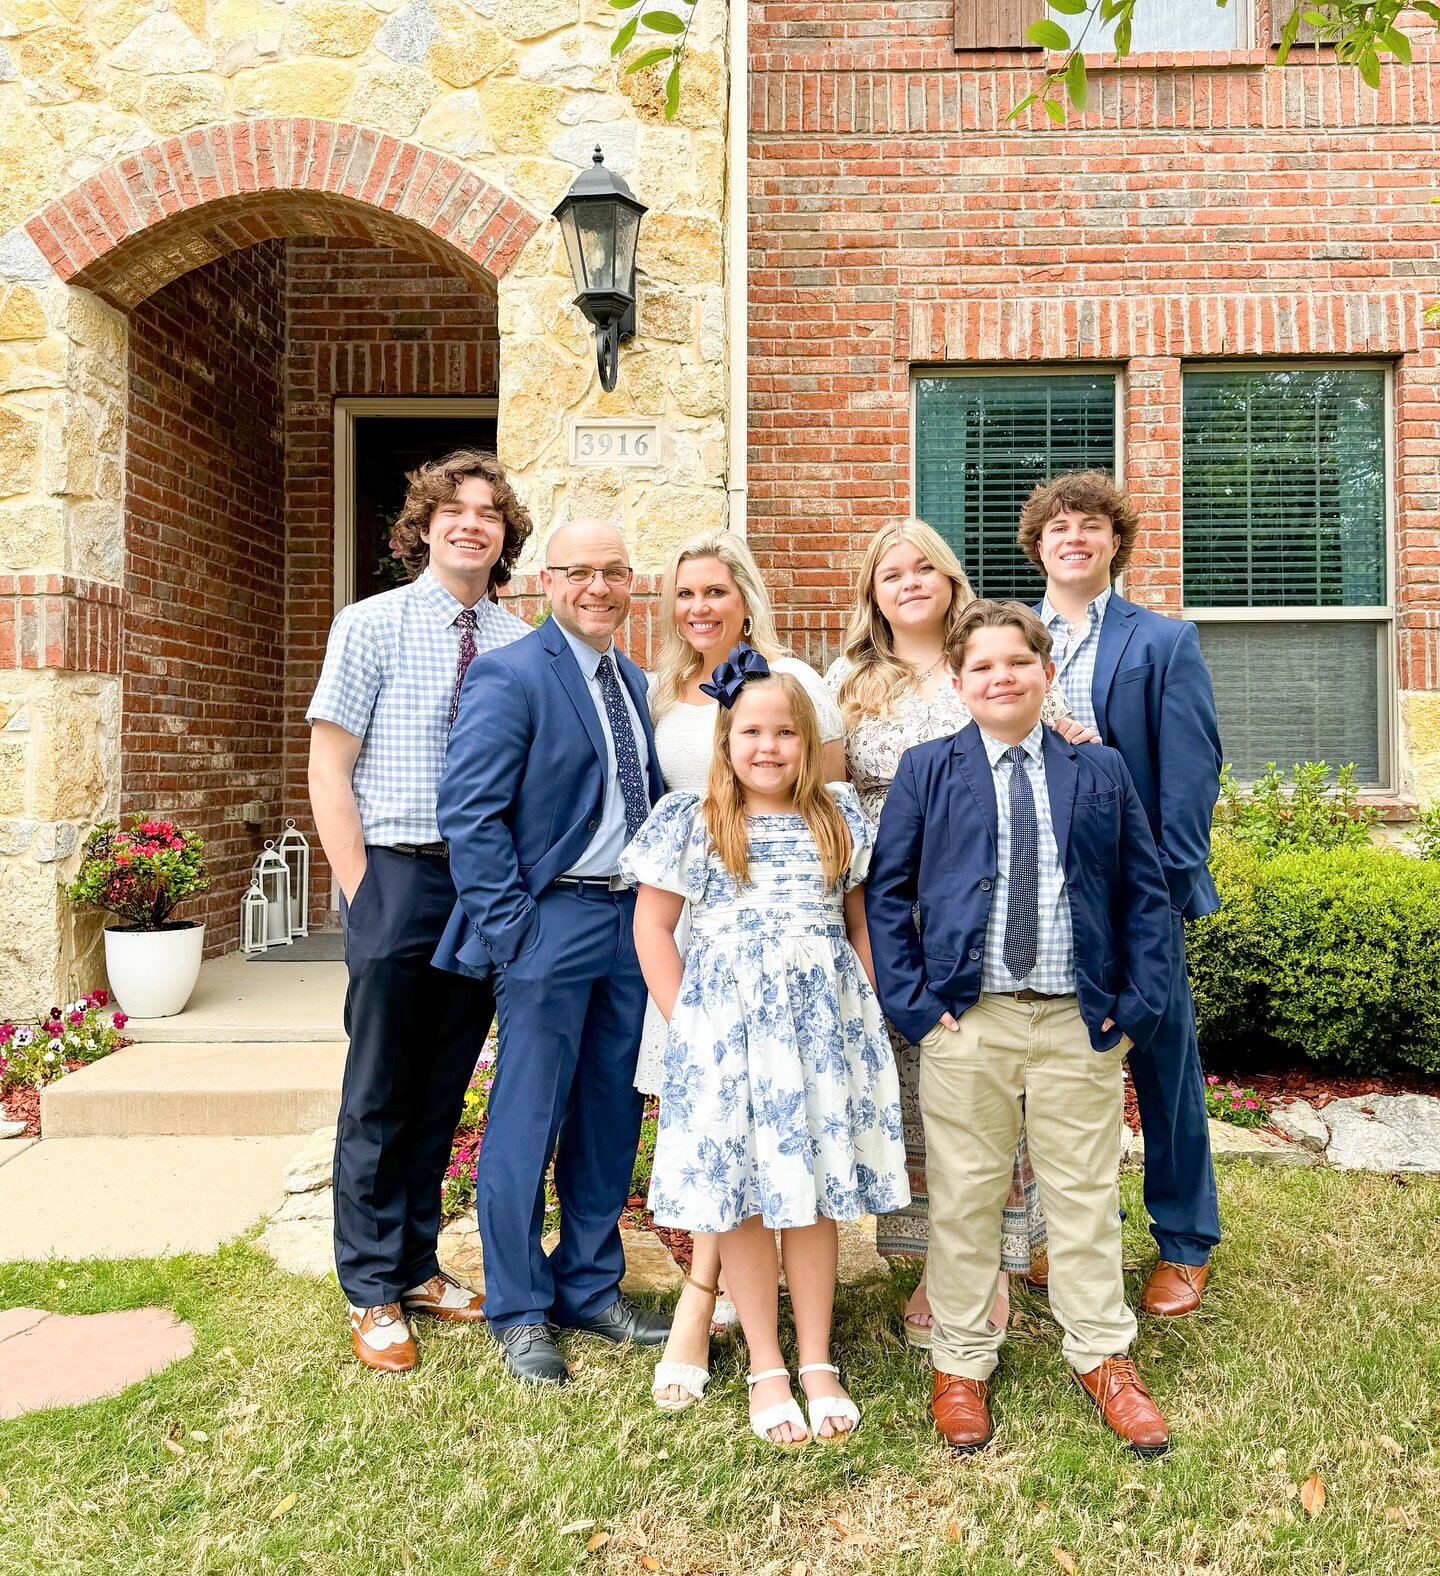 Happy Easter from our family to yours! 🐰It was a beautiful Easter with all my children home (just missing my wonderful son-in-law). It was a glorious day at church and I&rsquo;ve been humming the the hymn &ldquo;He is Risen all day! 🎵Sending love t